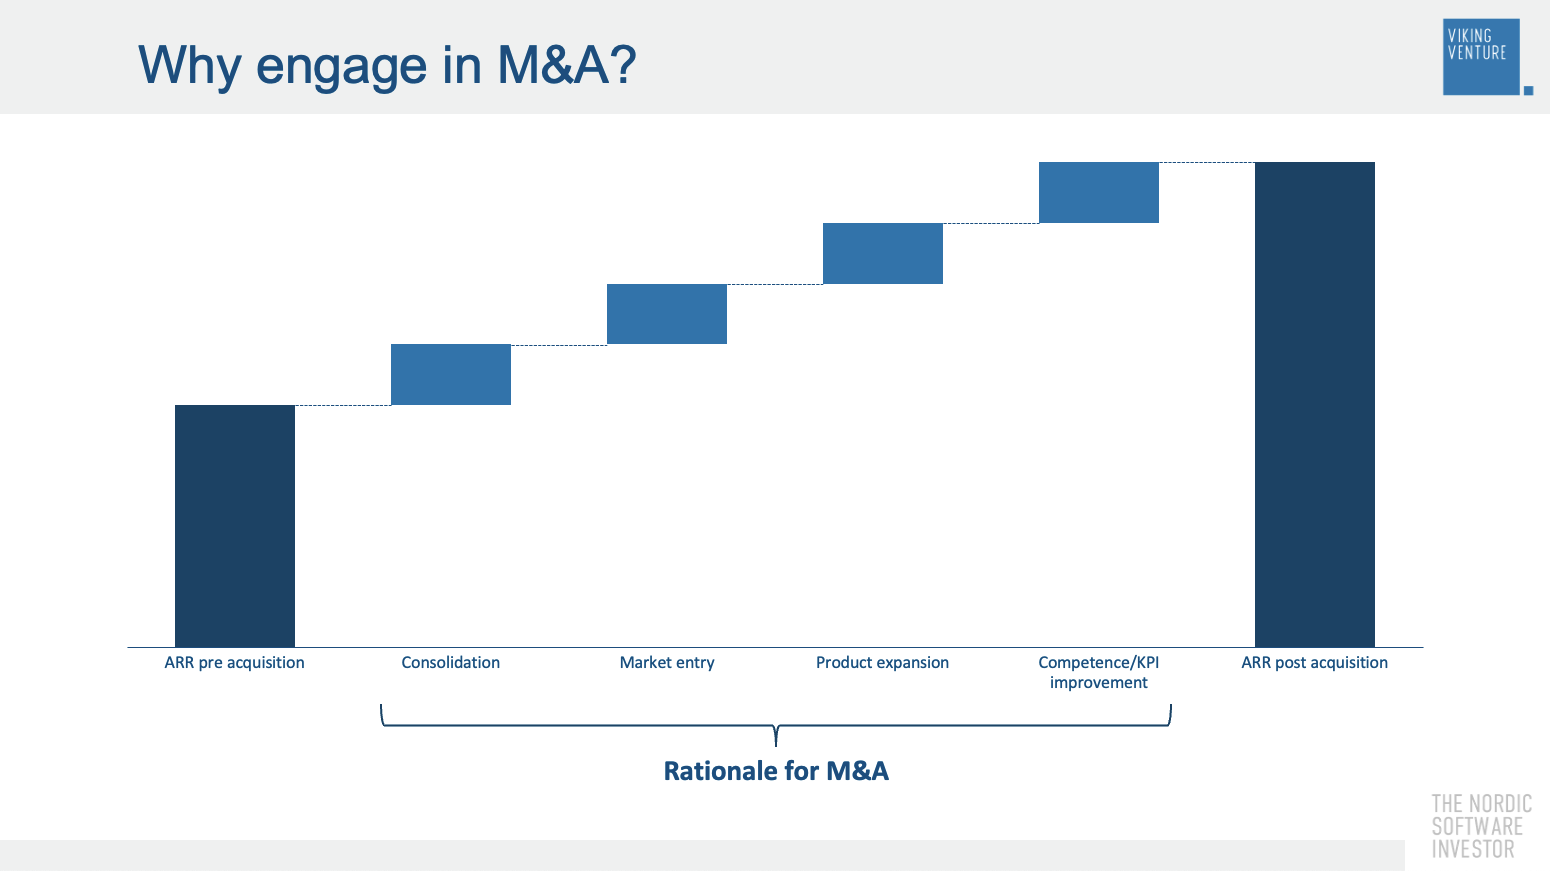 Why engage in M&A